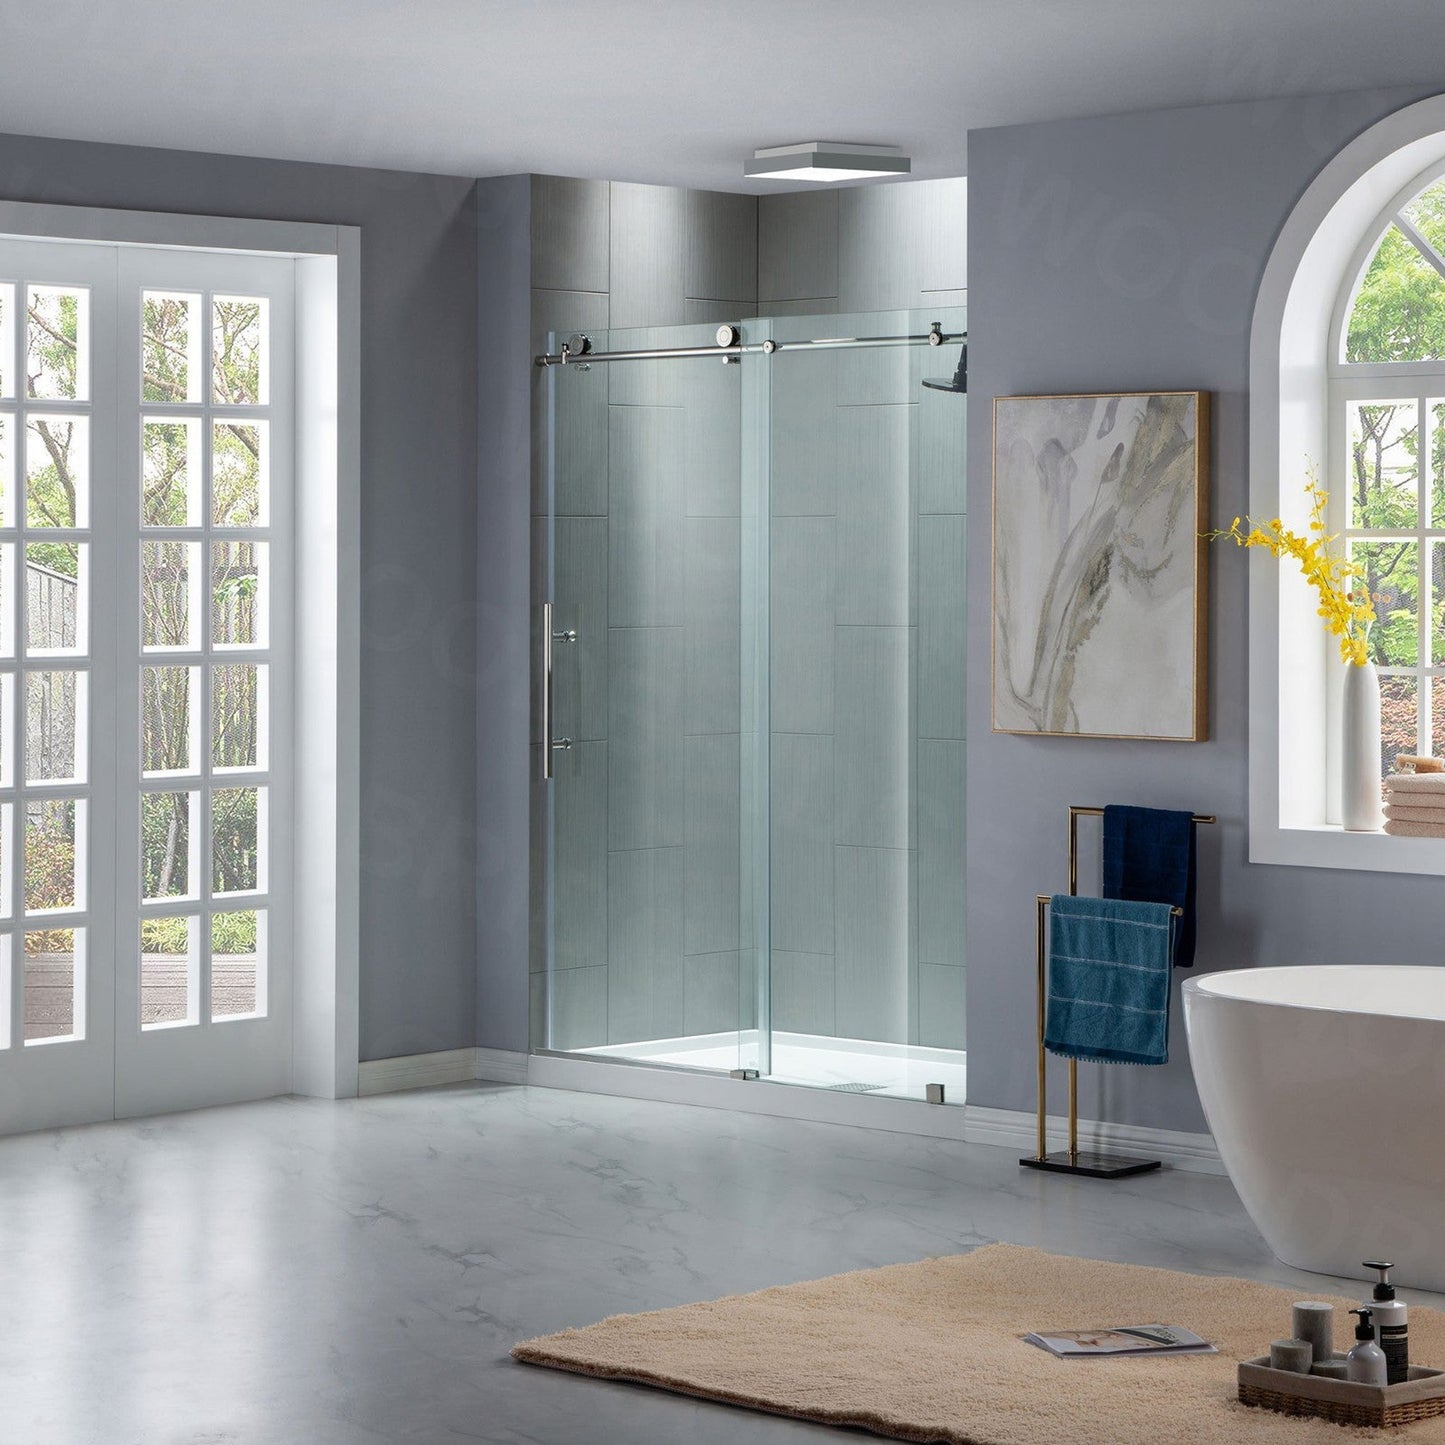 WoodBridge 48" W x 76" H Clear Tempered Glass Frameless Shower Door With Polished Chrome Hardware Finish